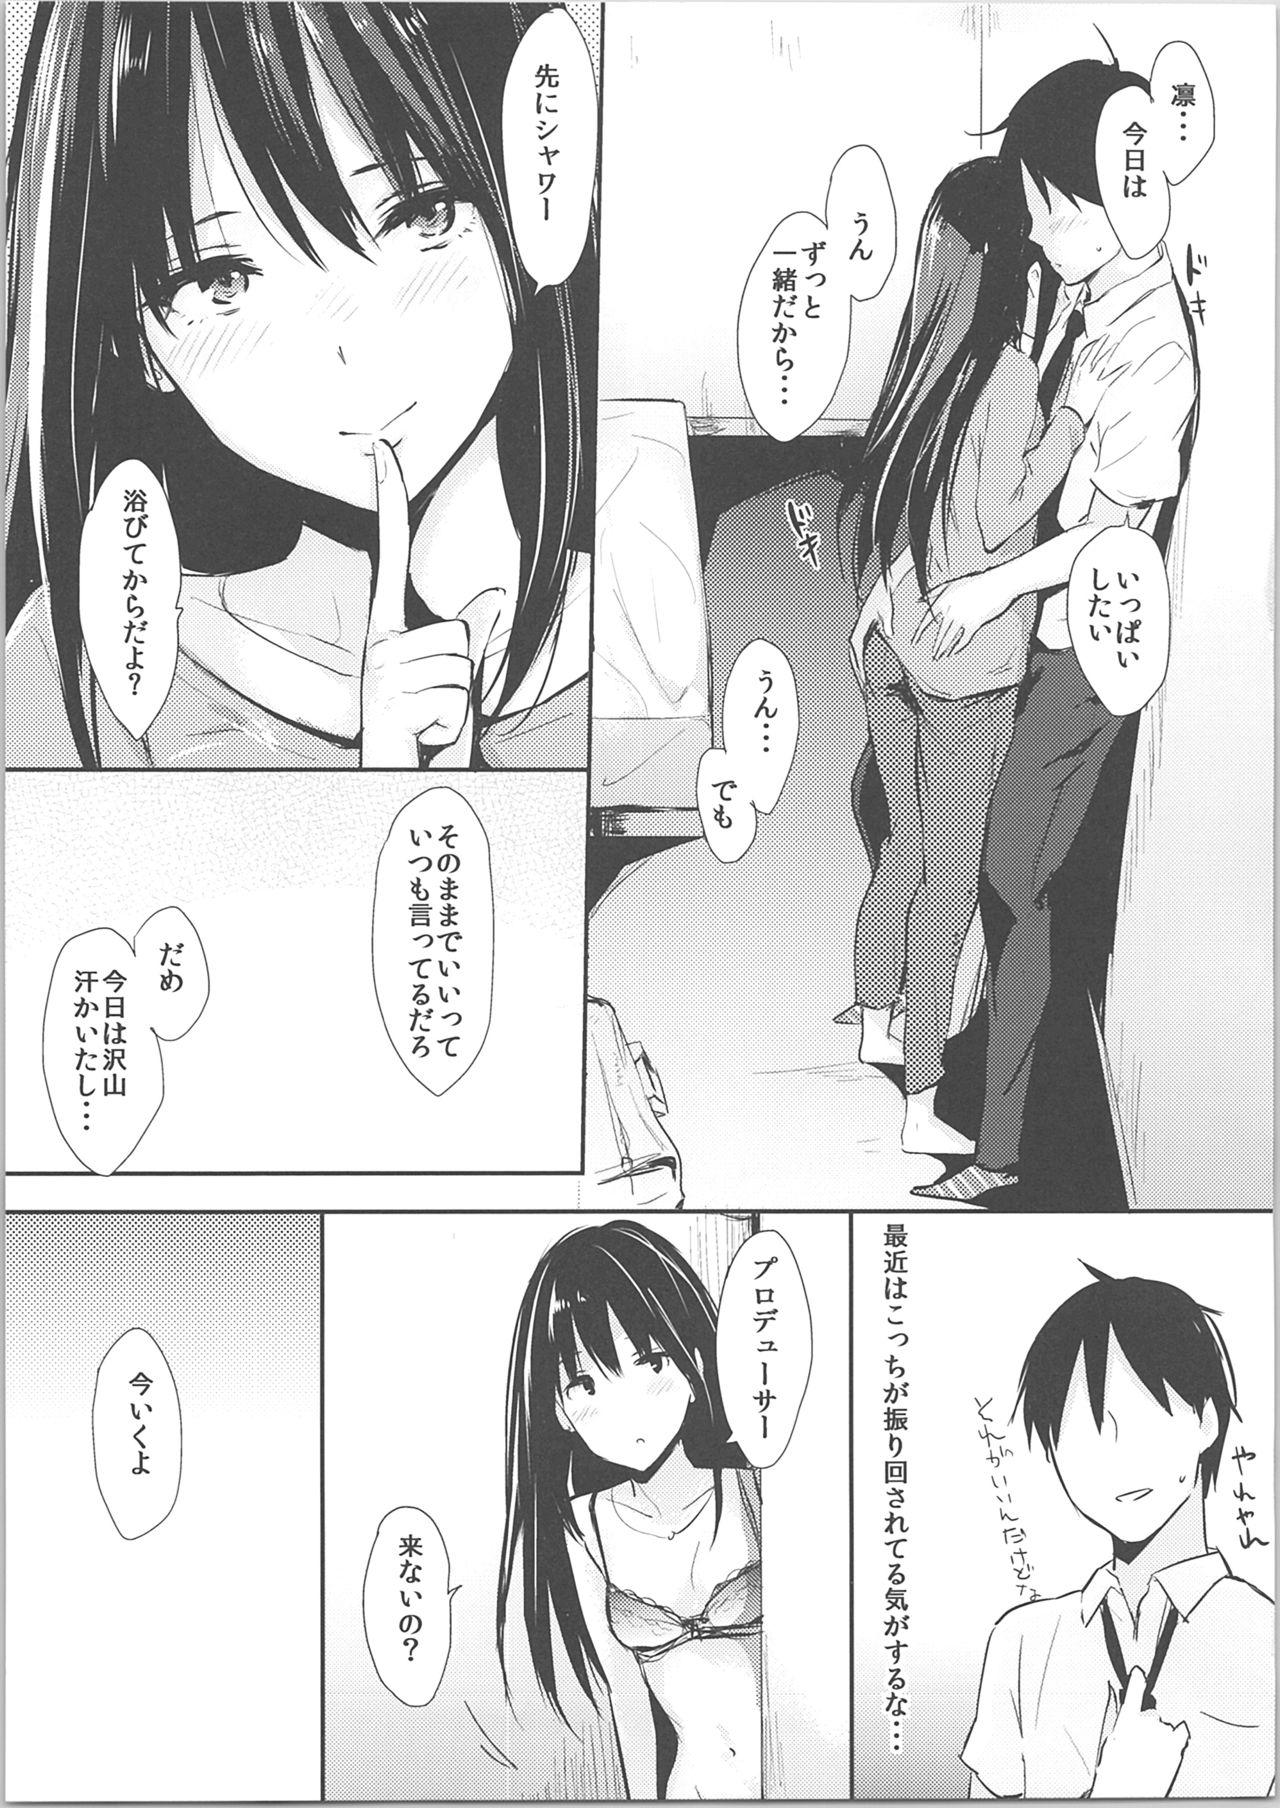 Moms Shiburin-ppoi no! 2 - The idolmaster Ass Lick - Page 6